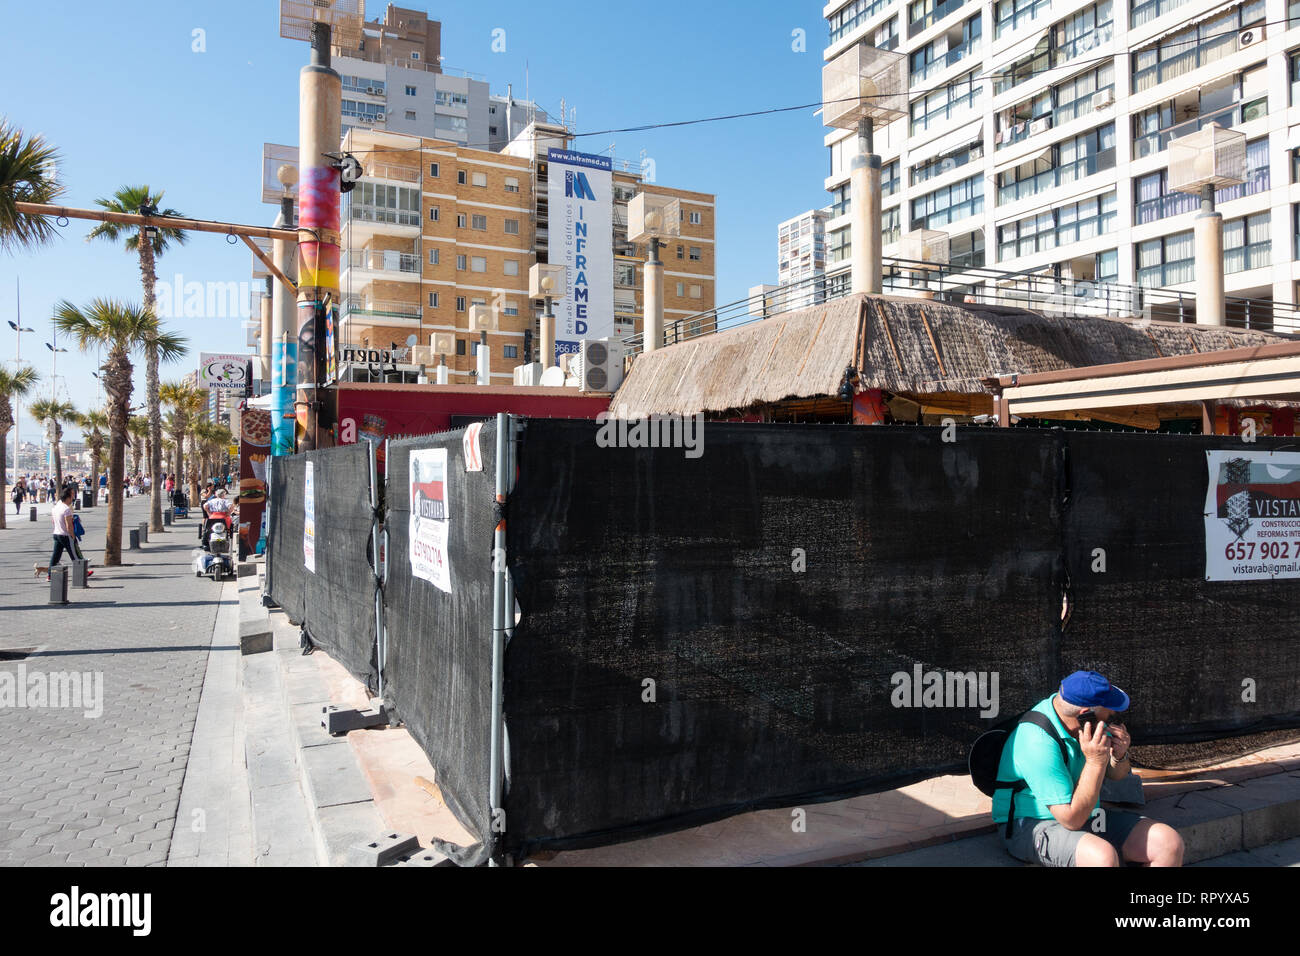 Benidorm, Costa Blanca, Spain, 23rd February 2019. The seafront Tiki Beach Bar on Levante beach, Benidorm is finally closed after much controversy and complaints from local residents. There are no reports as to wether this is a complete closure or just a refurbishment .  Credit: Mick Flynn/Alamy Live News Stock Photo